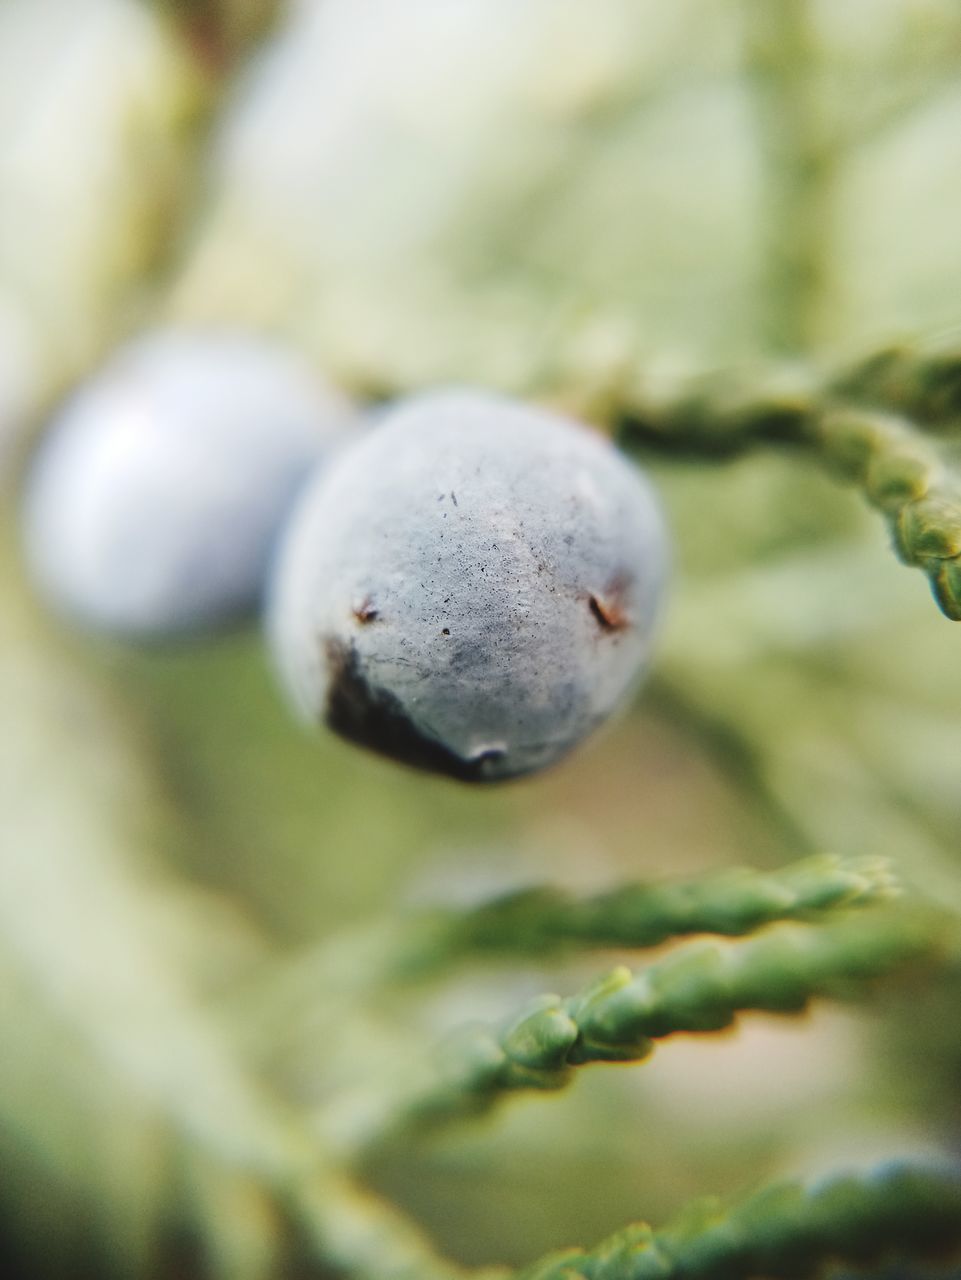 CLOSE-UP OF FRUIT ON A PLANT